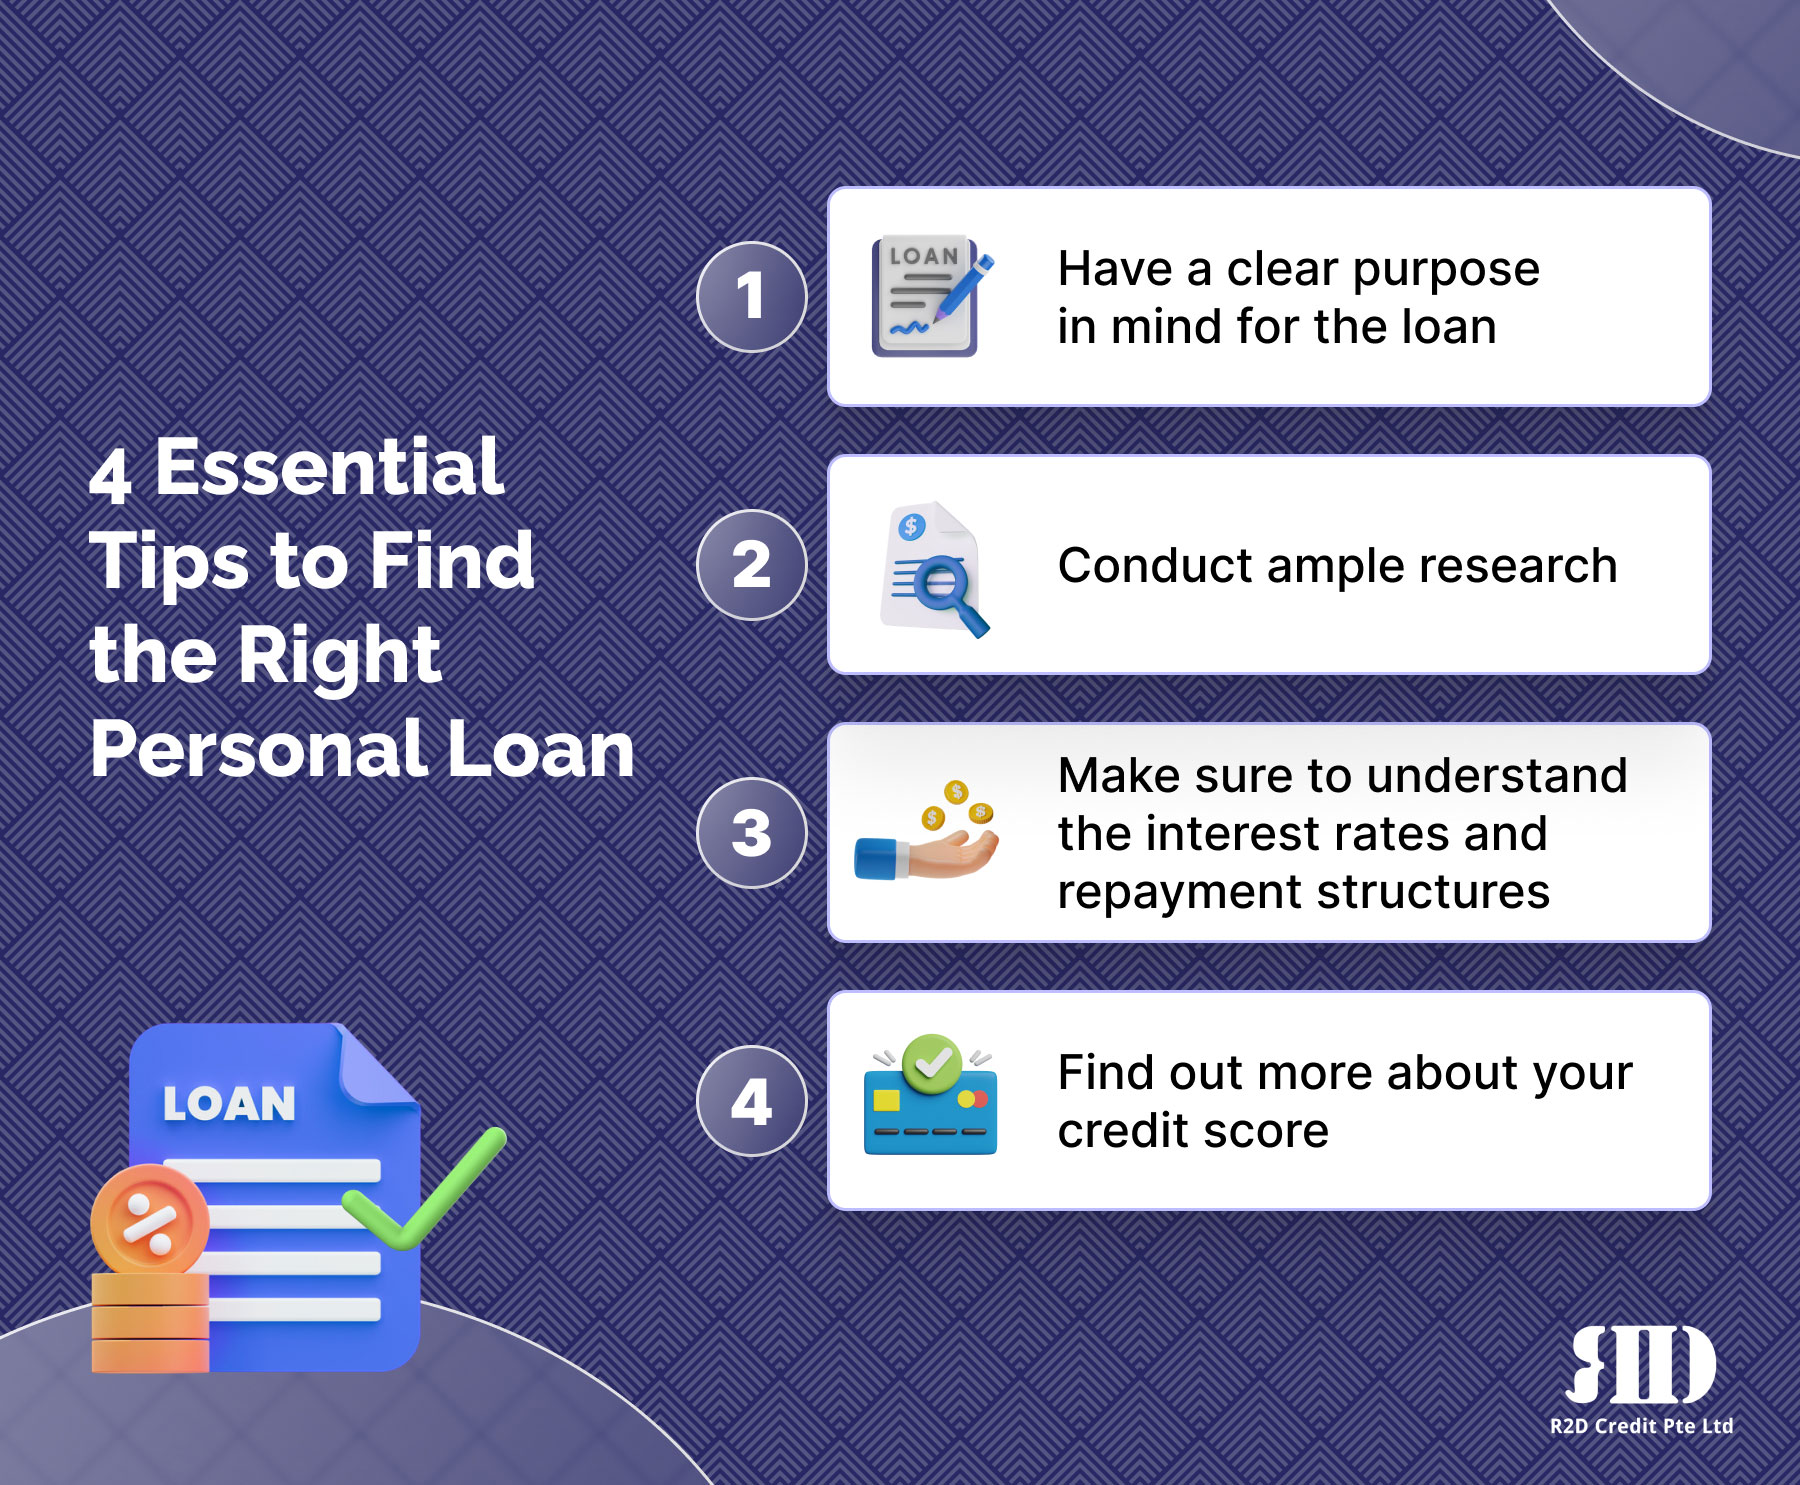 4 Essential Tips to Find the Right Personal Loan